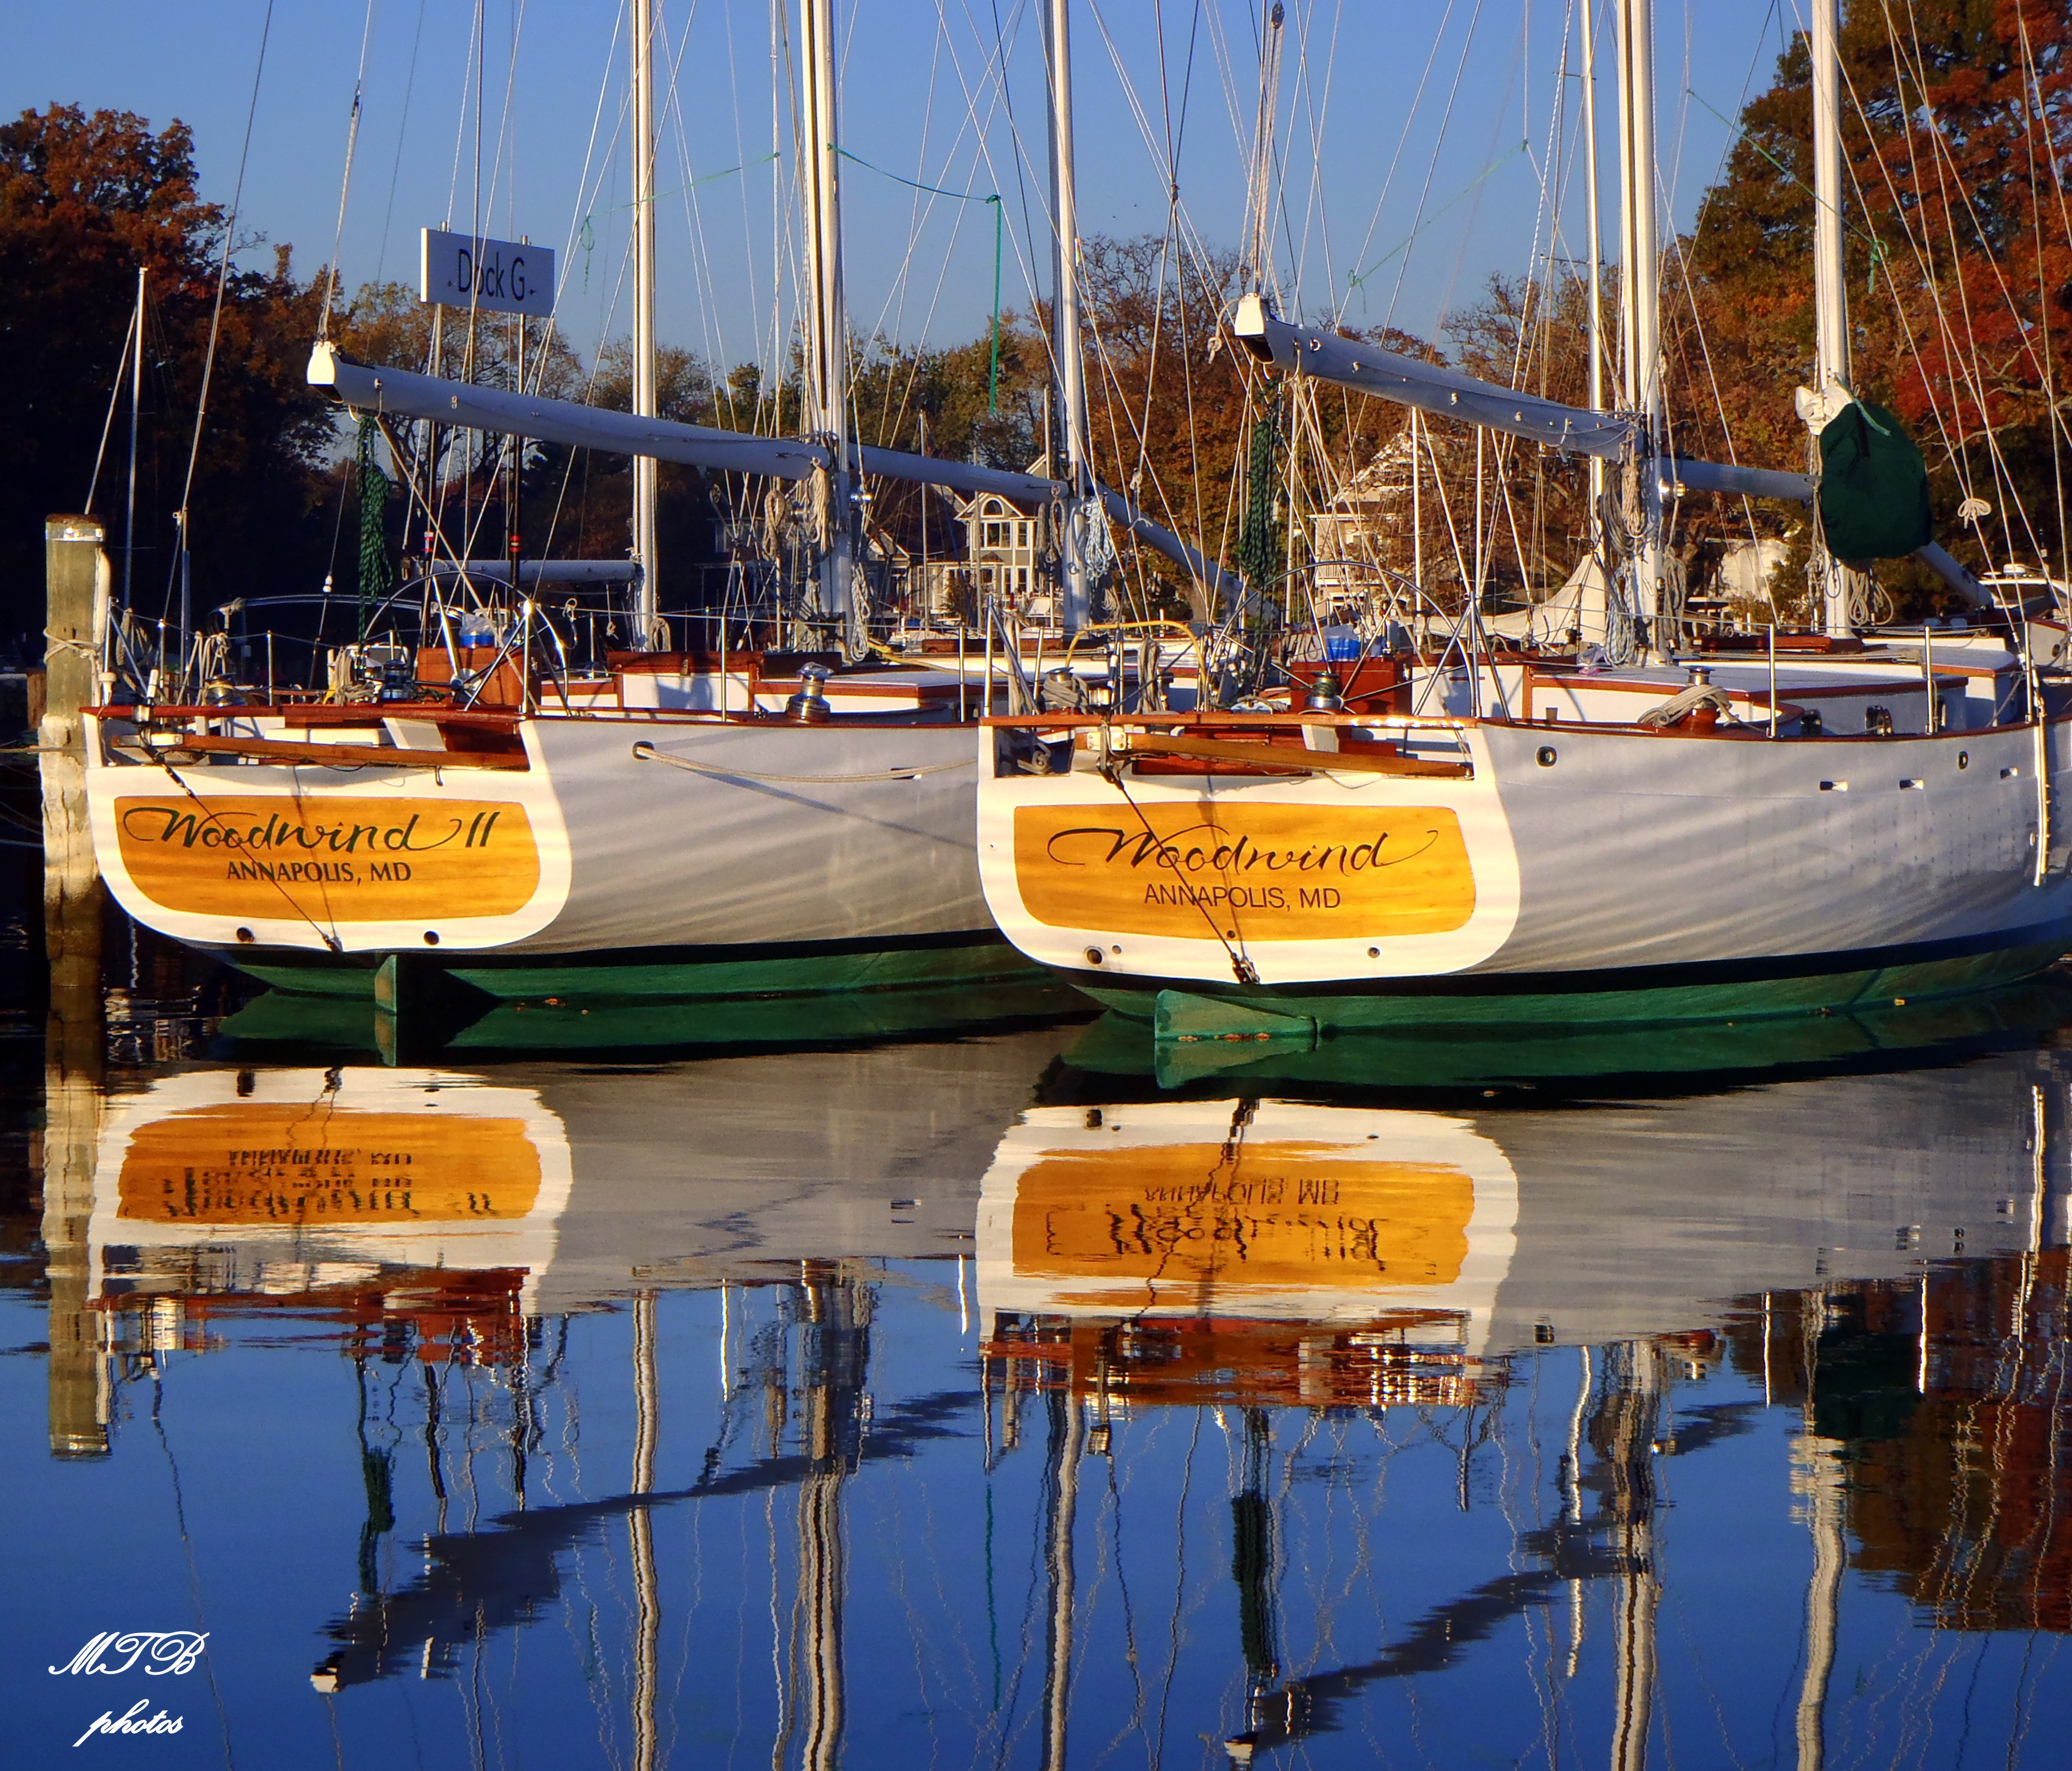 Two Woodwind Schooners side by side docked and reflecting in water